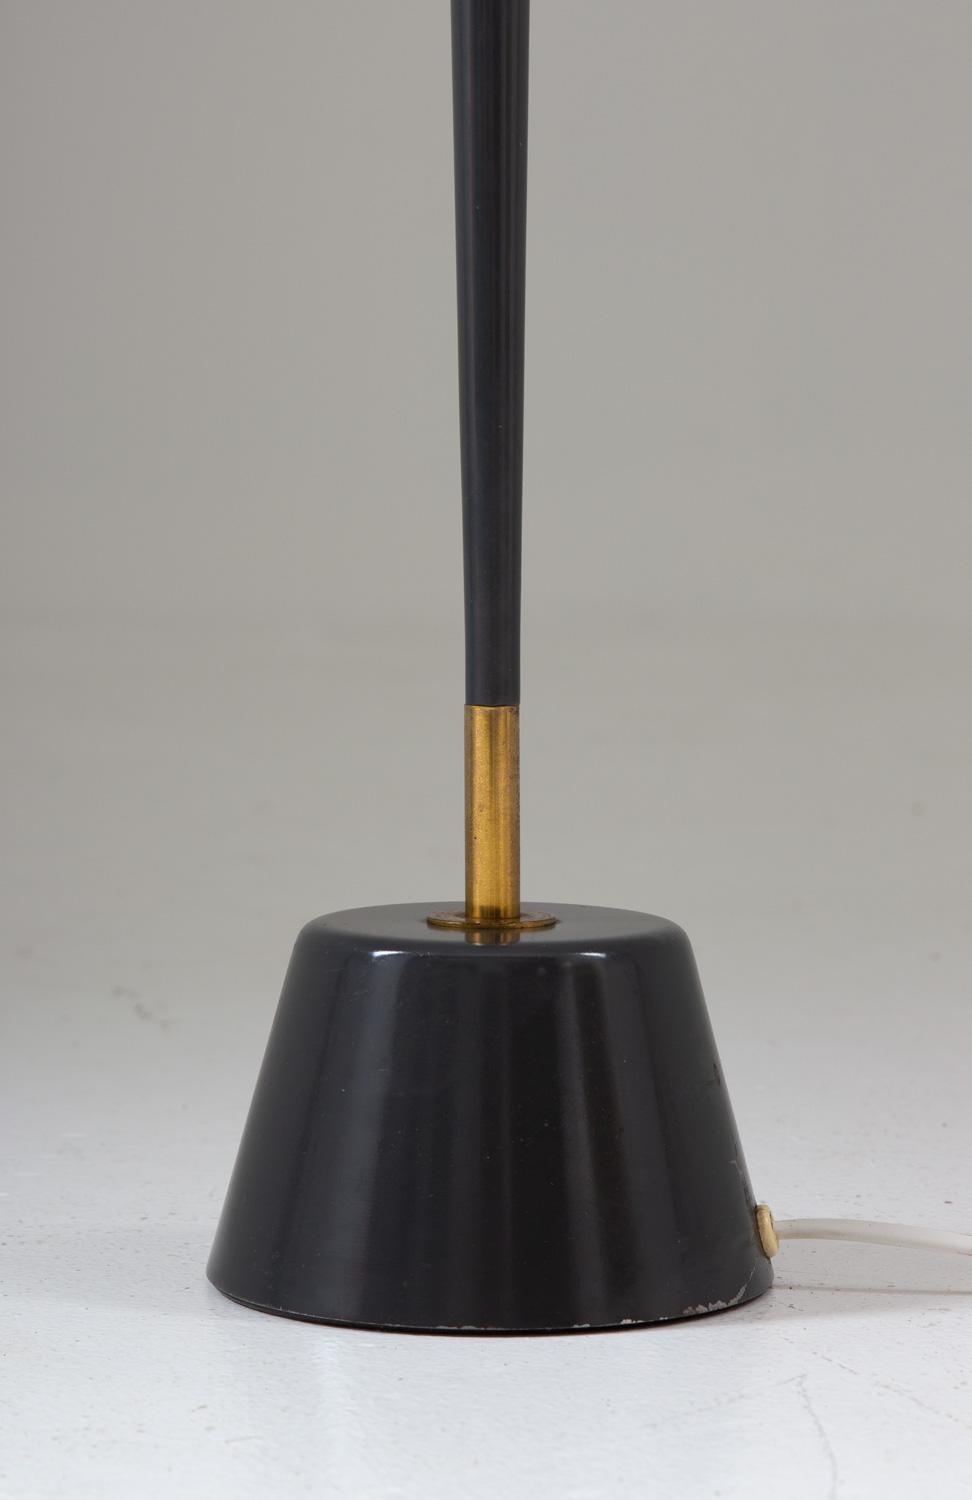 Scandinavian midcentury floor lamp by ASEA, Sweden.
This lamp consists of a blue/grey concave pole with brass details, supported by a heavy cone-shaped metal base. Very elegant and minimalistic design.

Condition: Very good original condition.